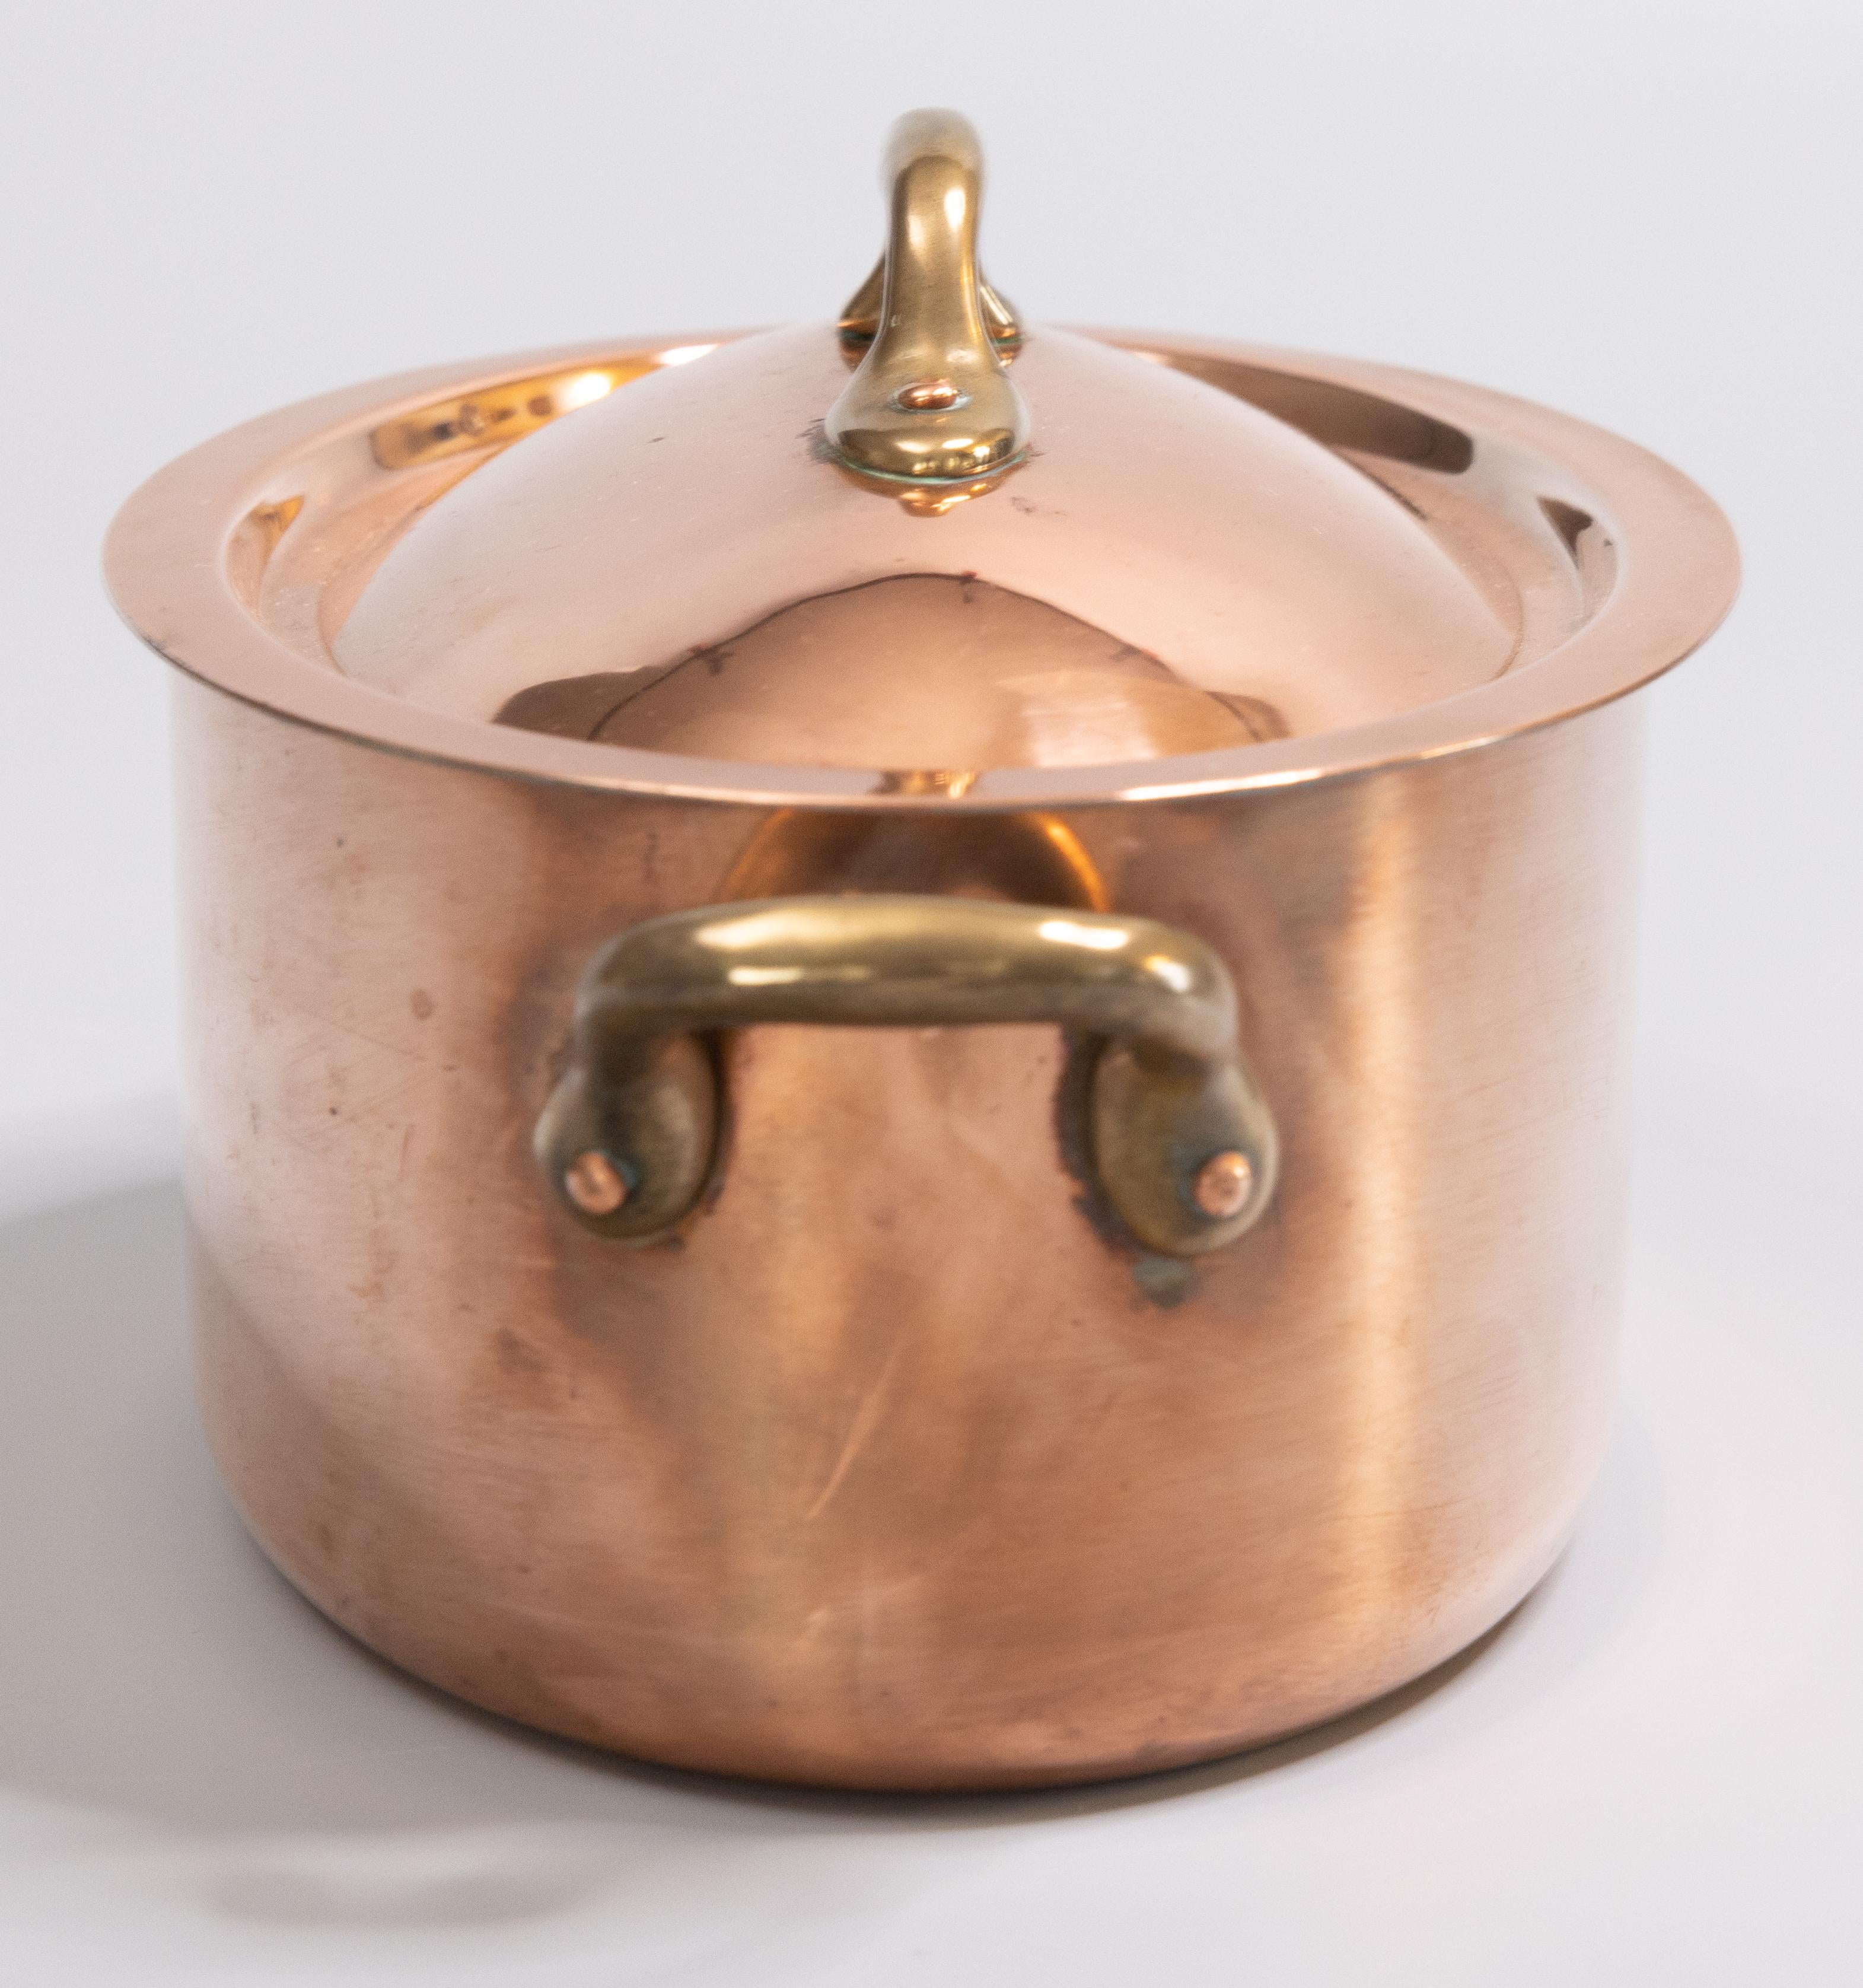 A gorgeous early 20th century petite French oval lidded copper pot, circa 1930. Marked 